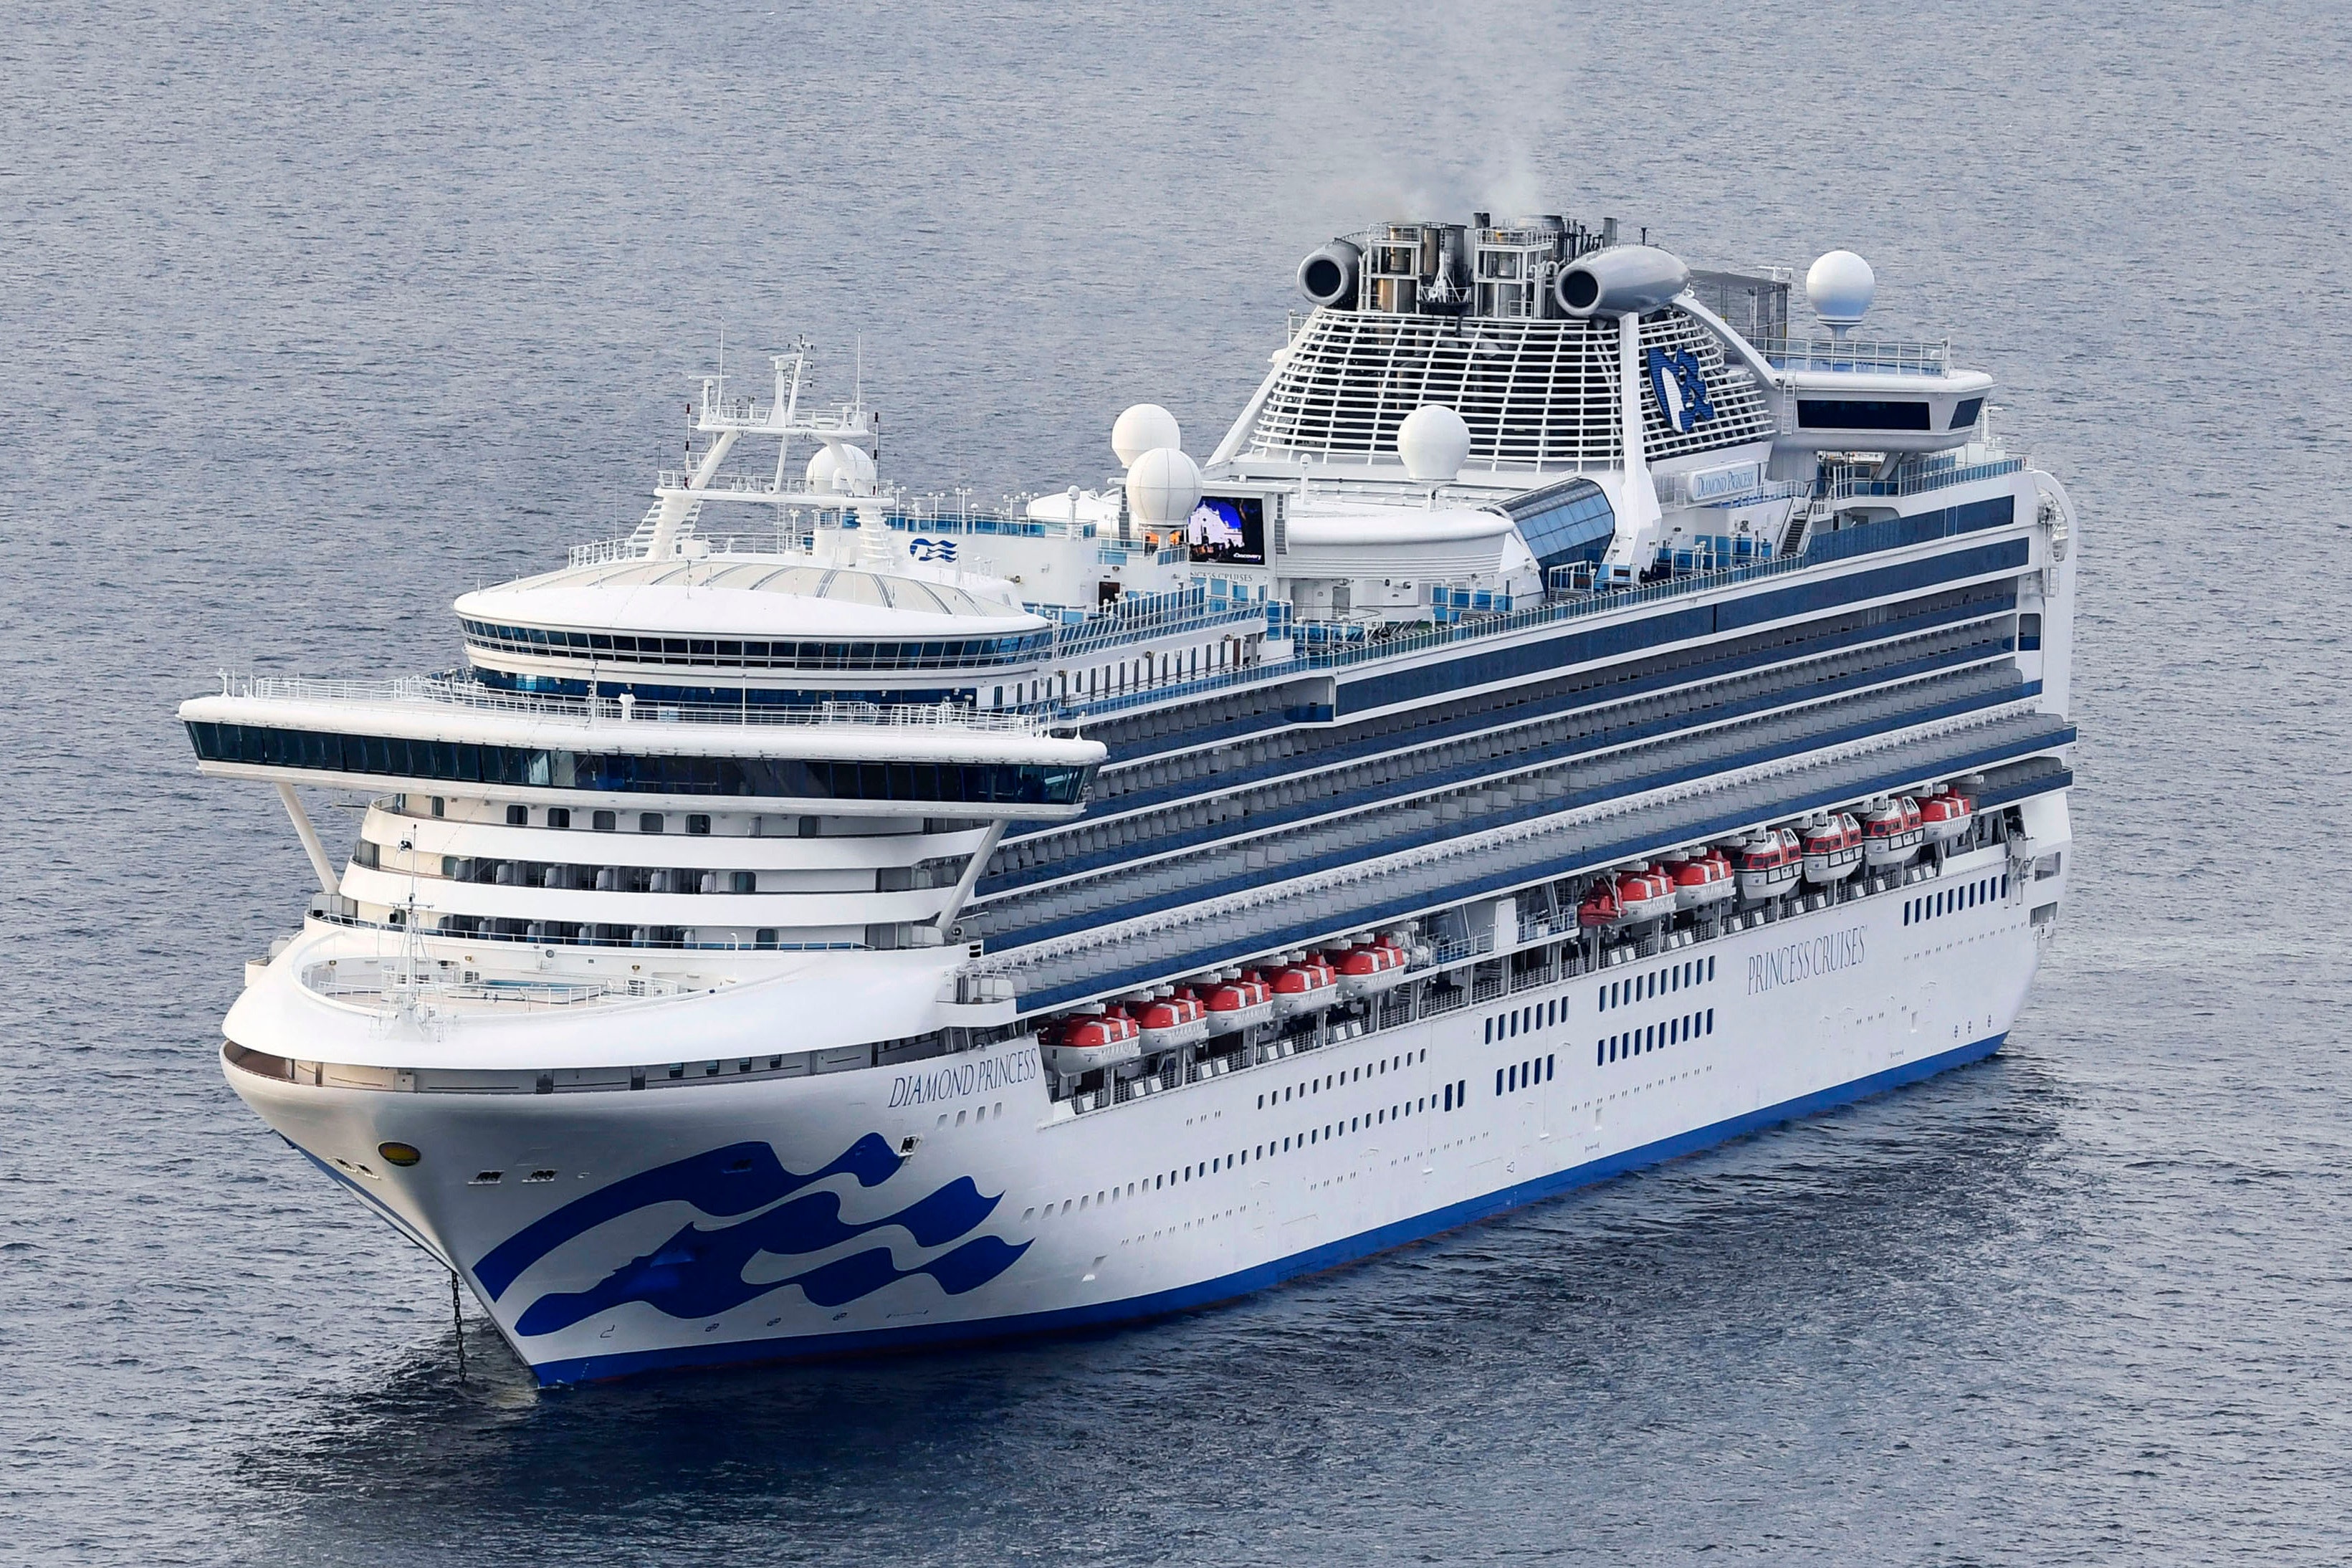 Over 3,000 people quarantined on cruise ship after passenger tests